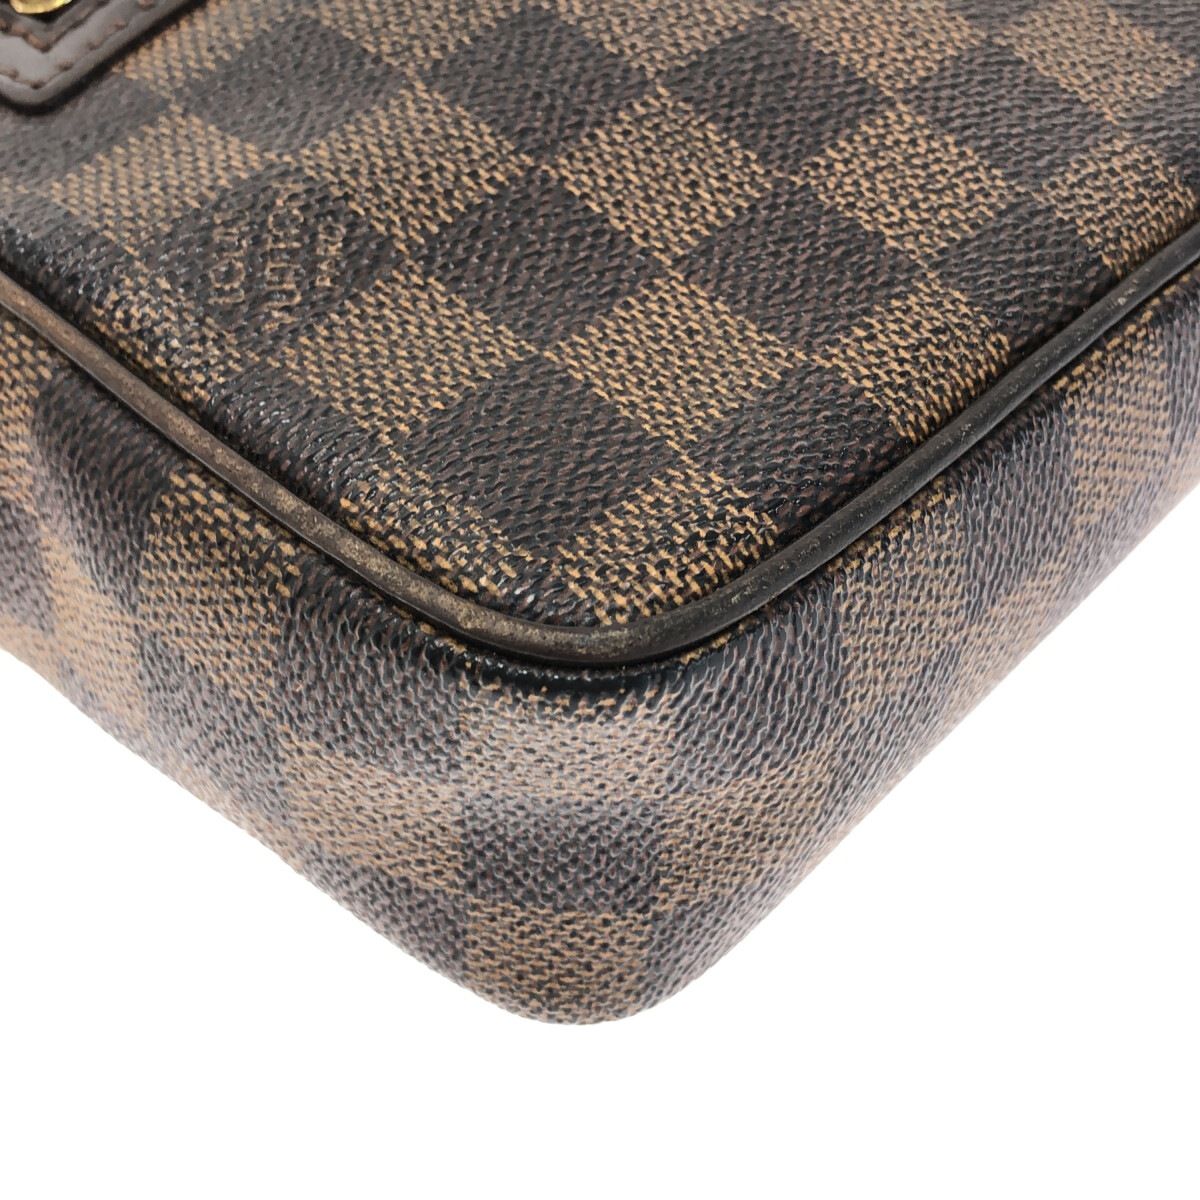 LOUIS VUITTON(ルイヴィトン) セカンドバッグ ダミエ ポシェット ビエ ...